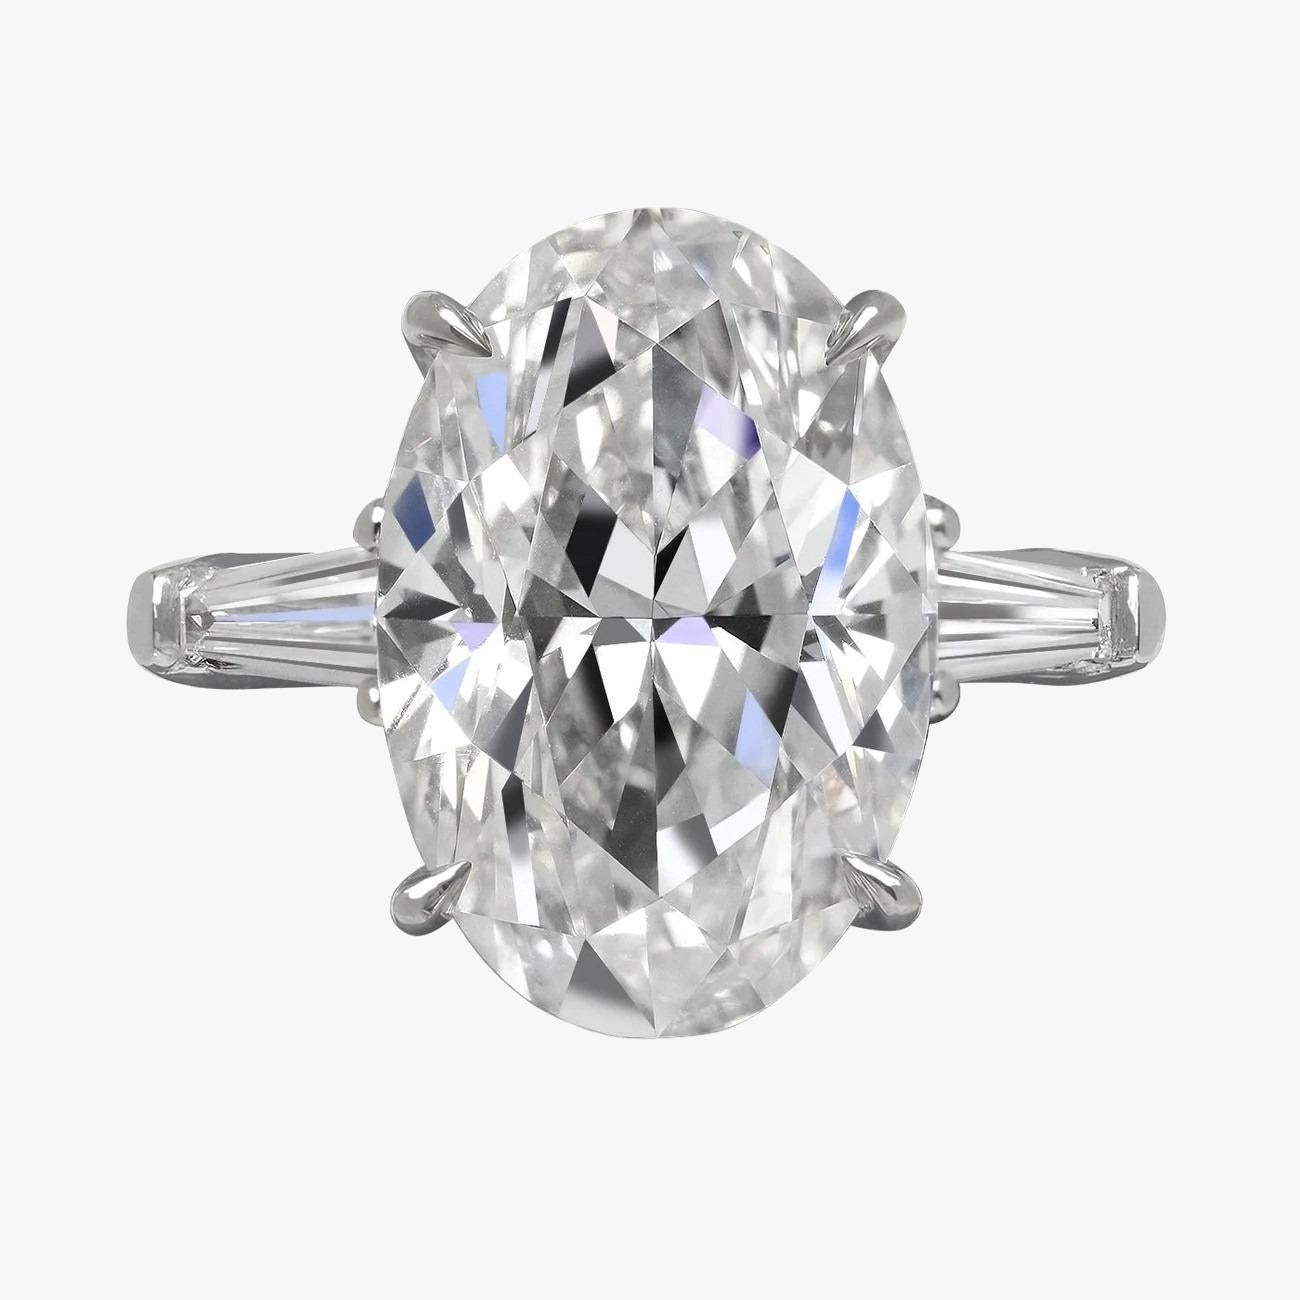 Elevate your elegance with this stunning GIA Certified Oval Diamond 3 Carat Ring, enhanced with tapered baguette diamonds. At its center, a breathtaking oval-cut diamond, certified by the esteemed Gemological Institute of America (GIA), takes the